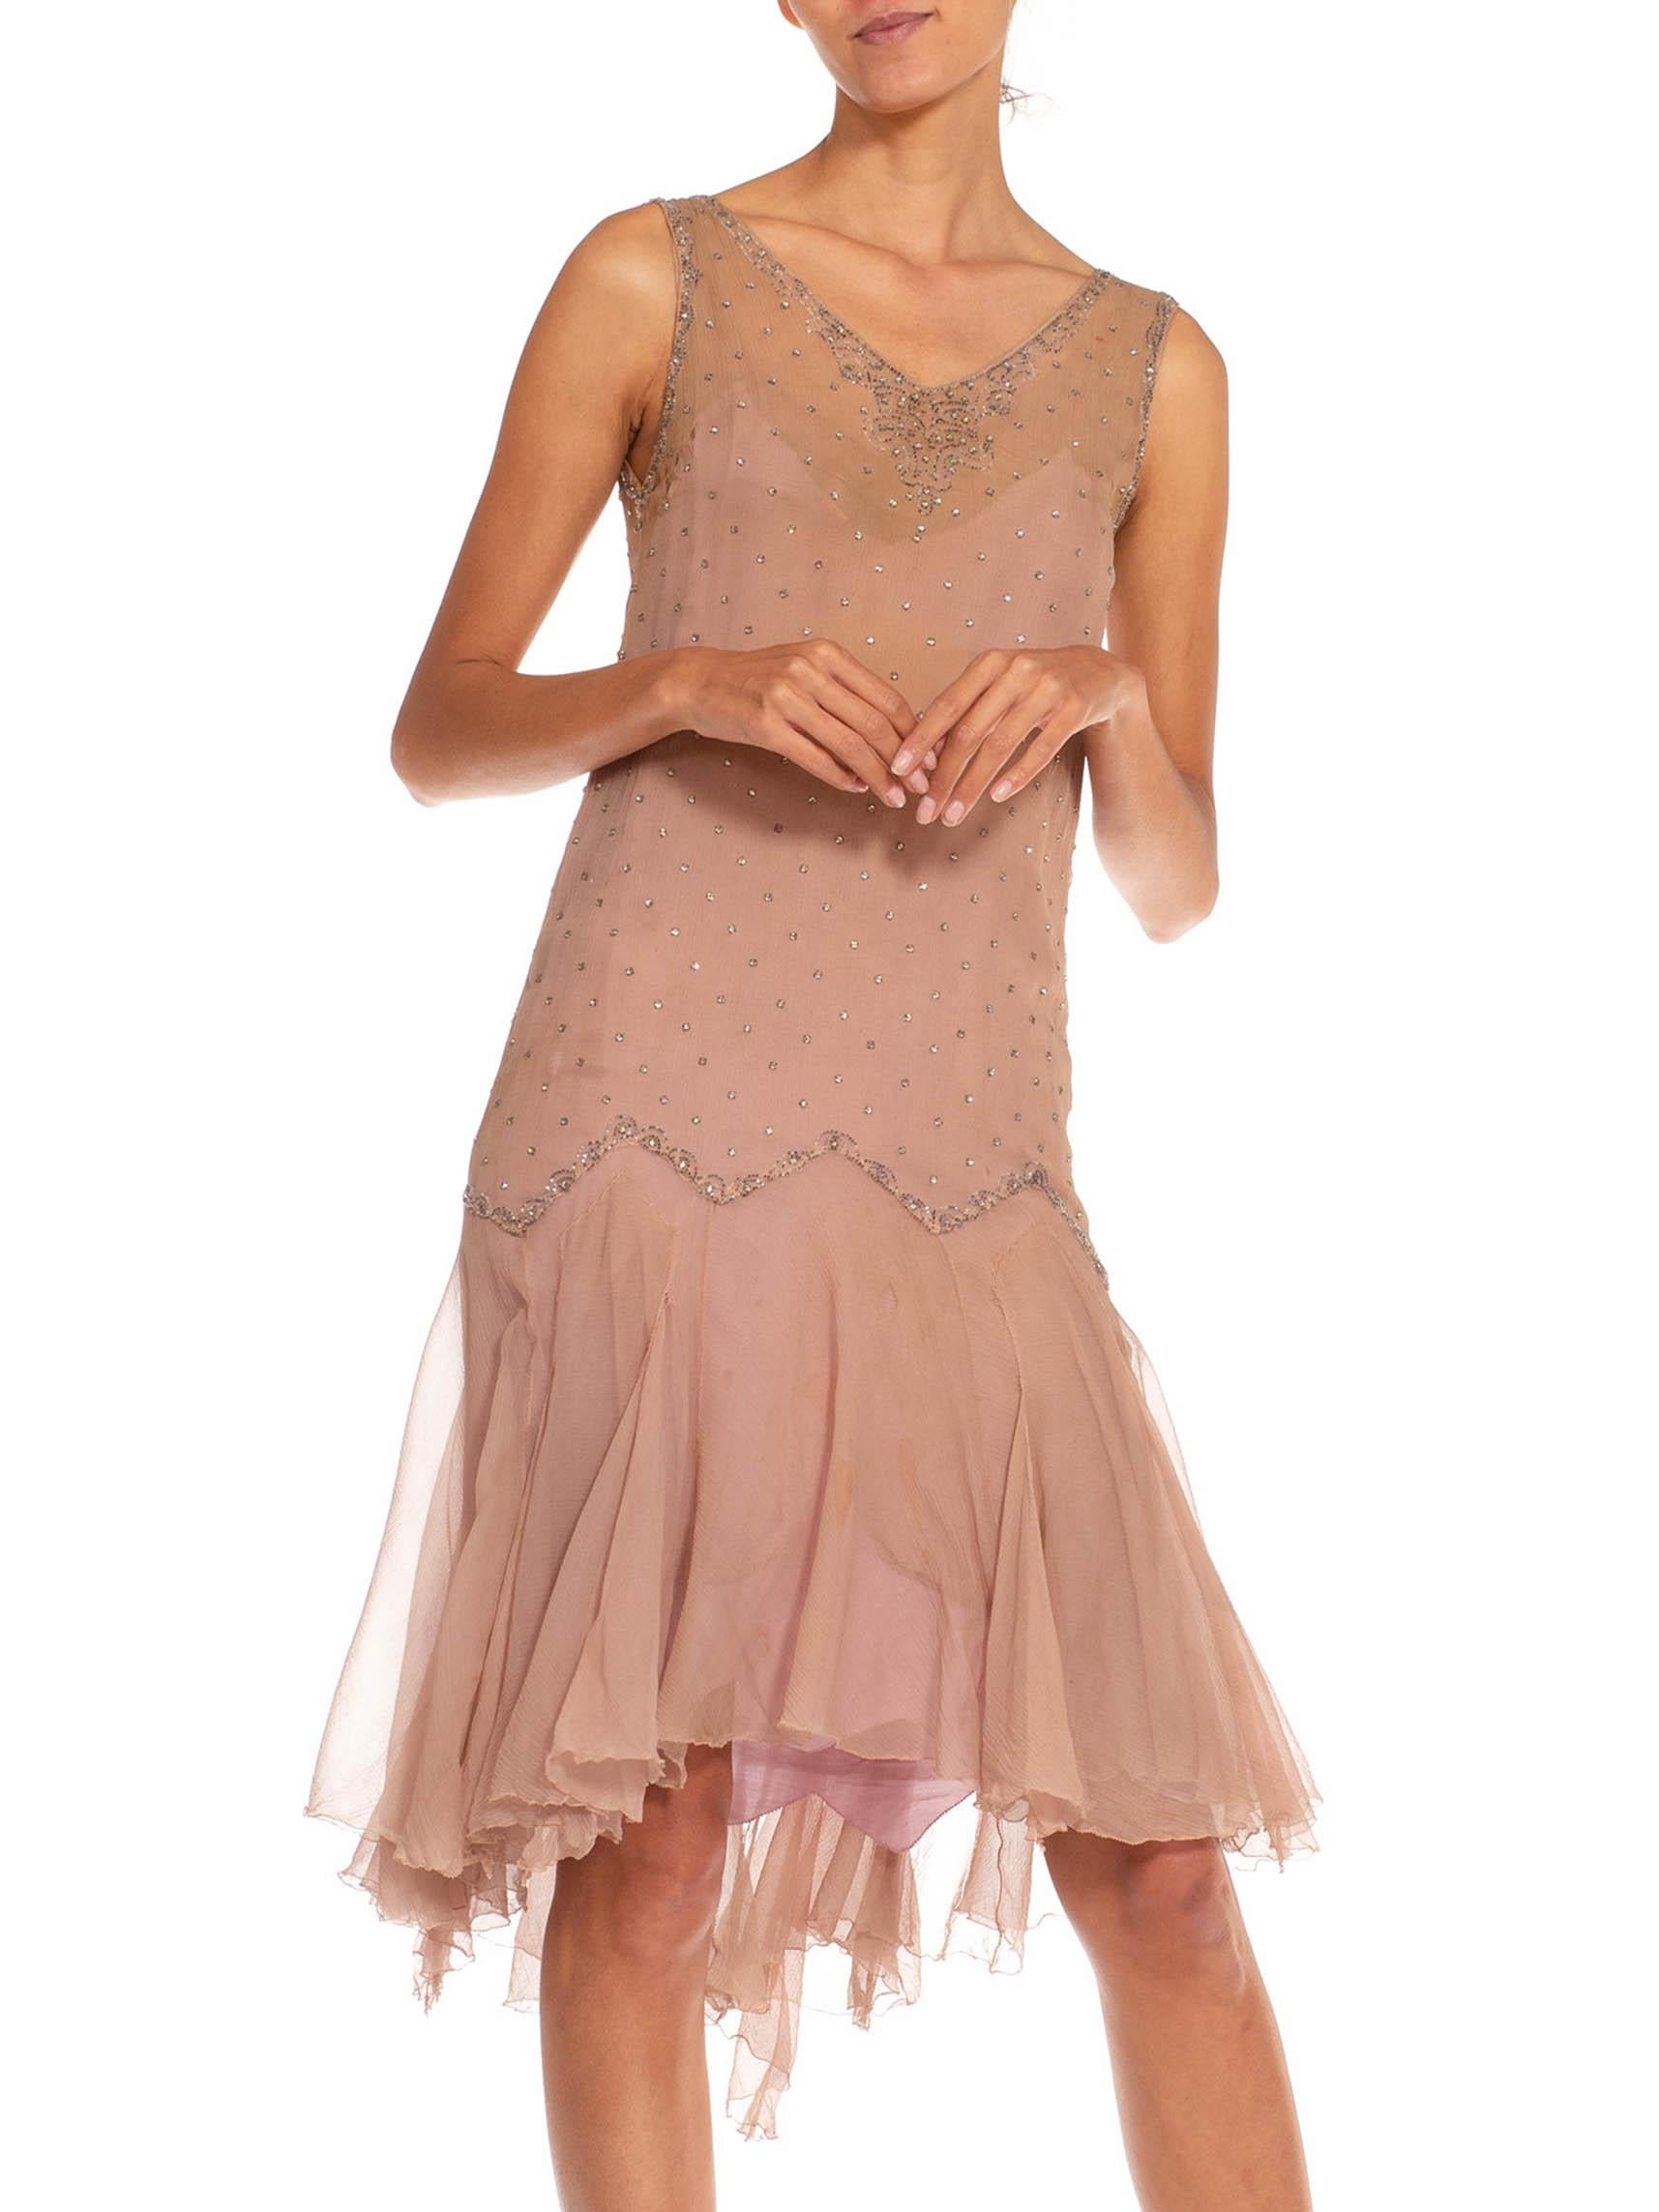 Women's 1920S Dusty Rose Silk Chiffon Flapper Dress Embellished With Crystals